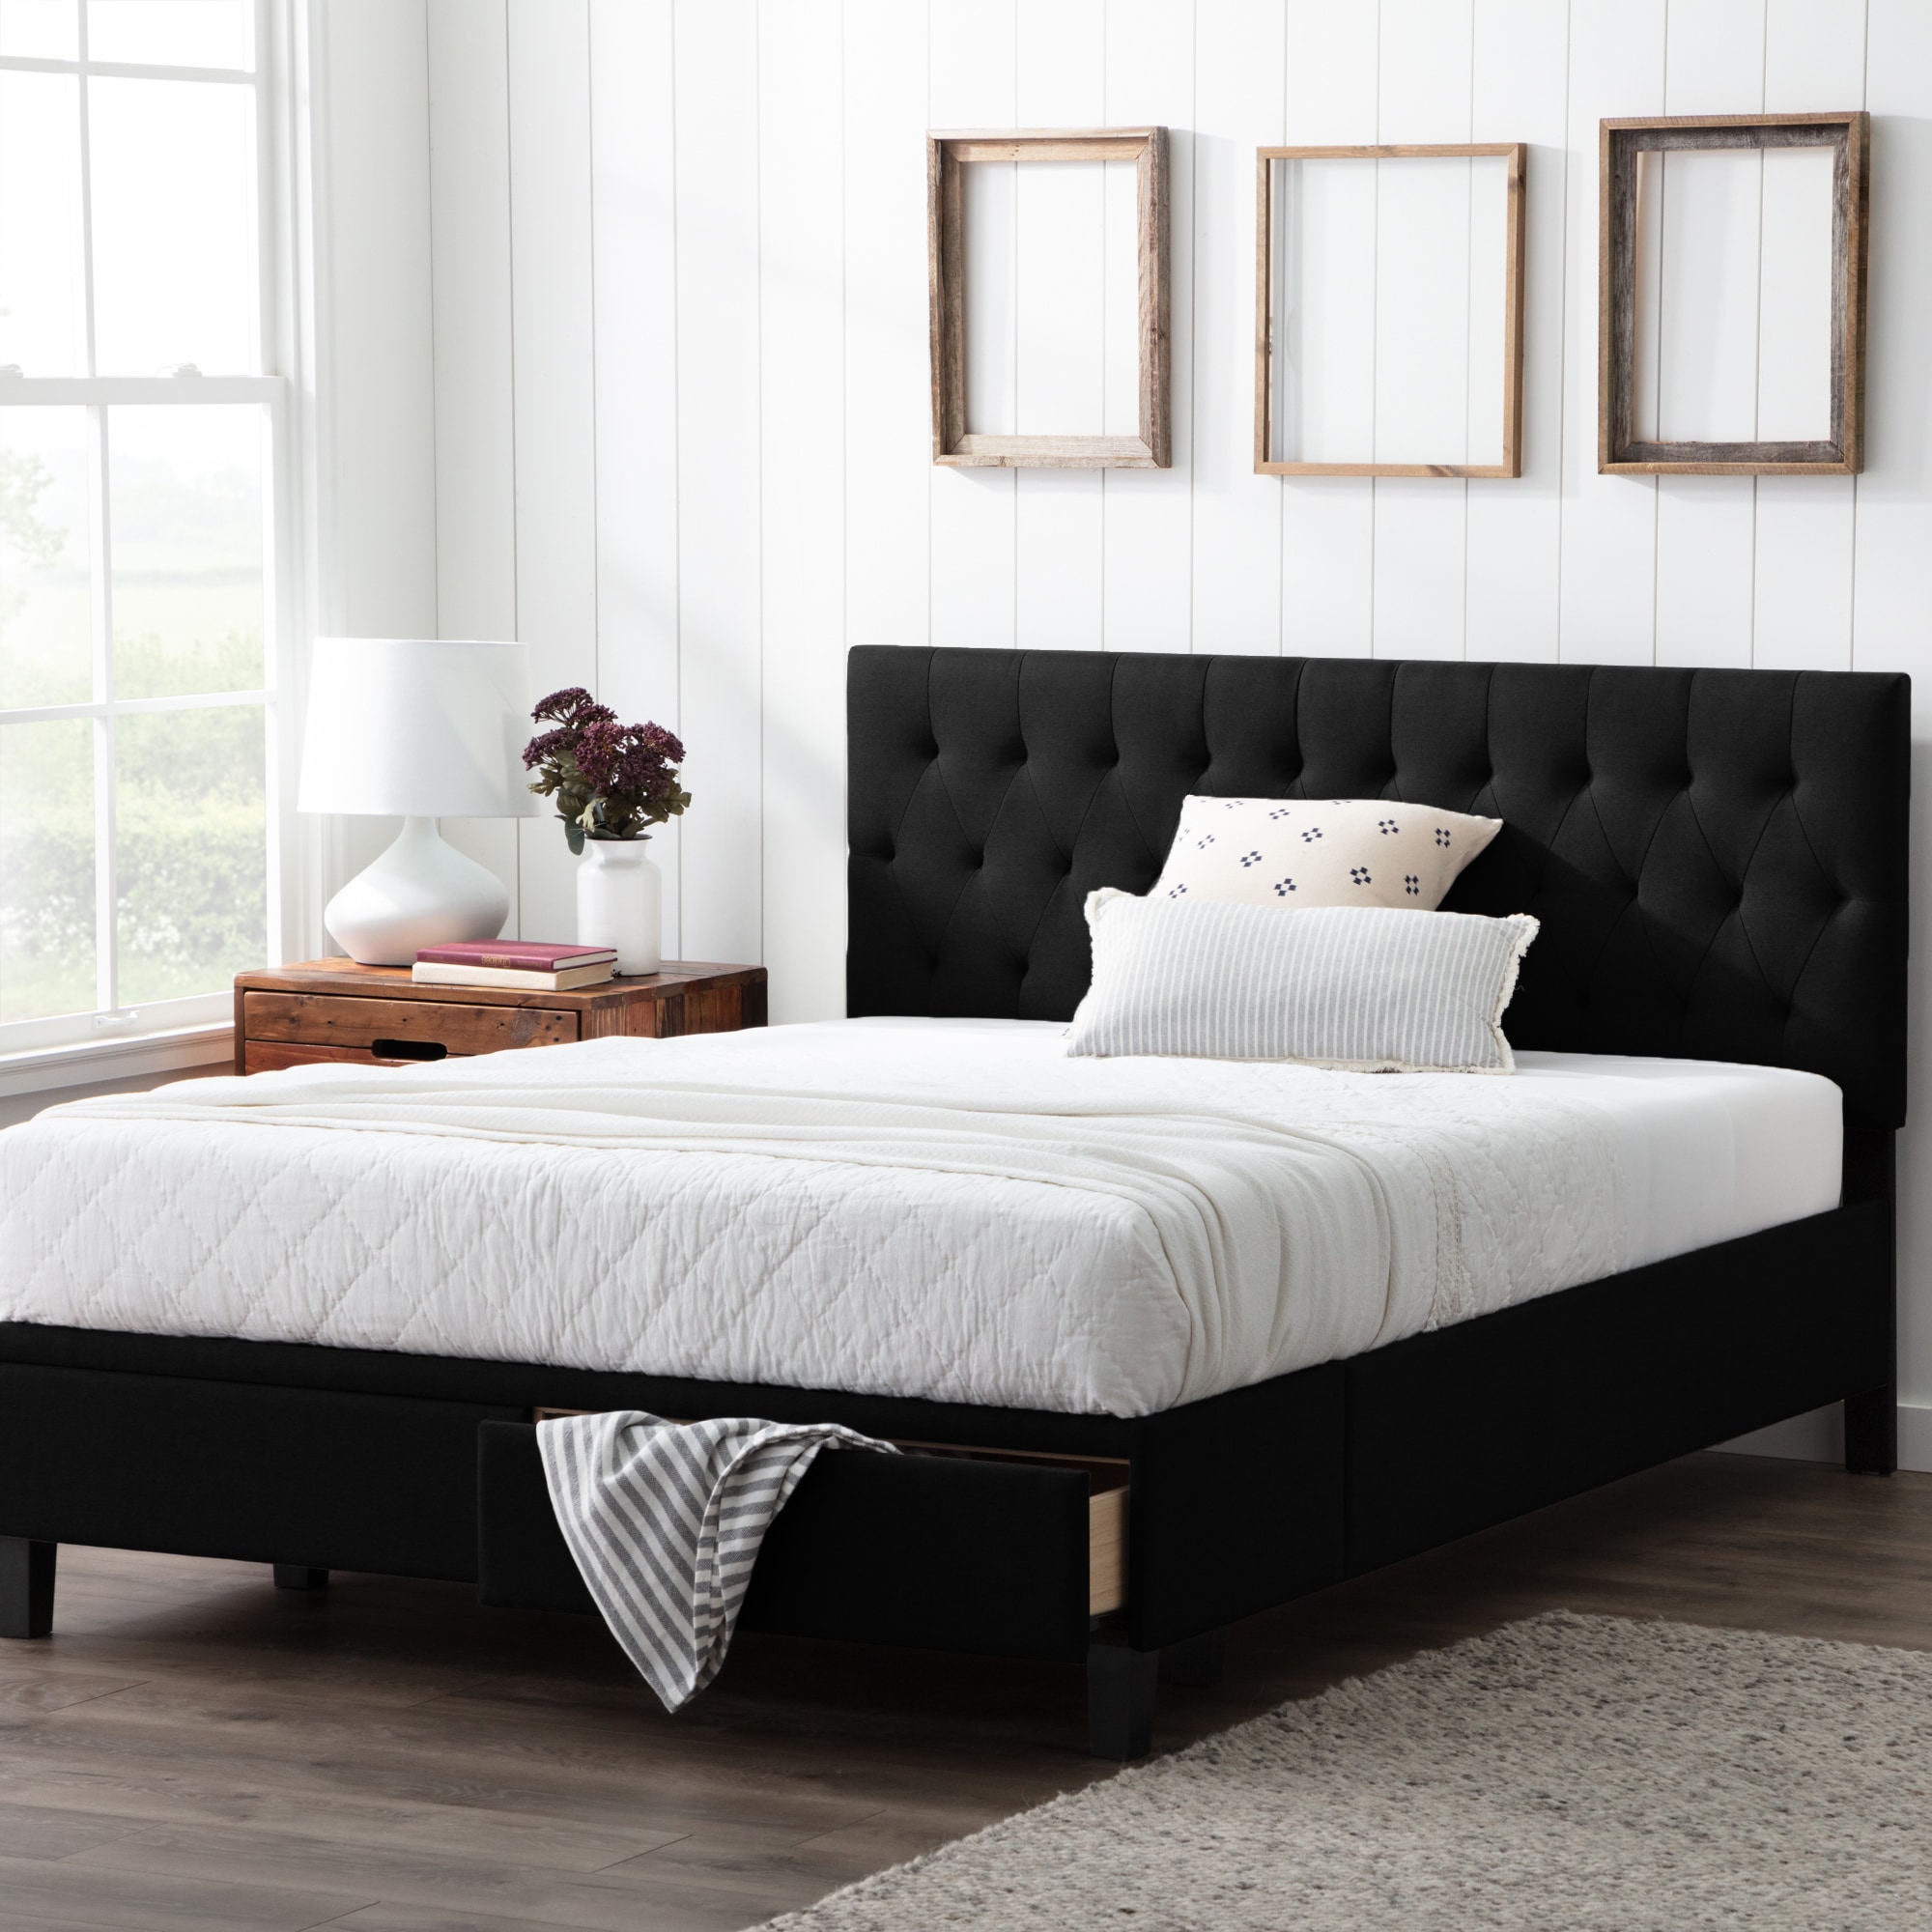 Brookside Anna Black California King, California King Bed Frame With Storage Drawers